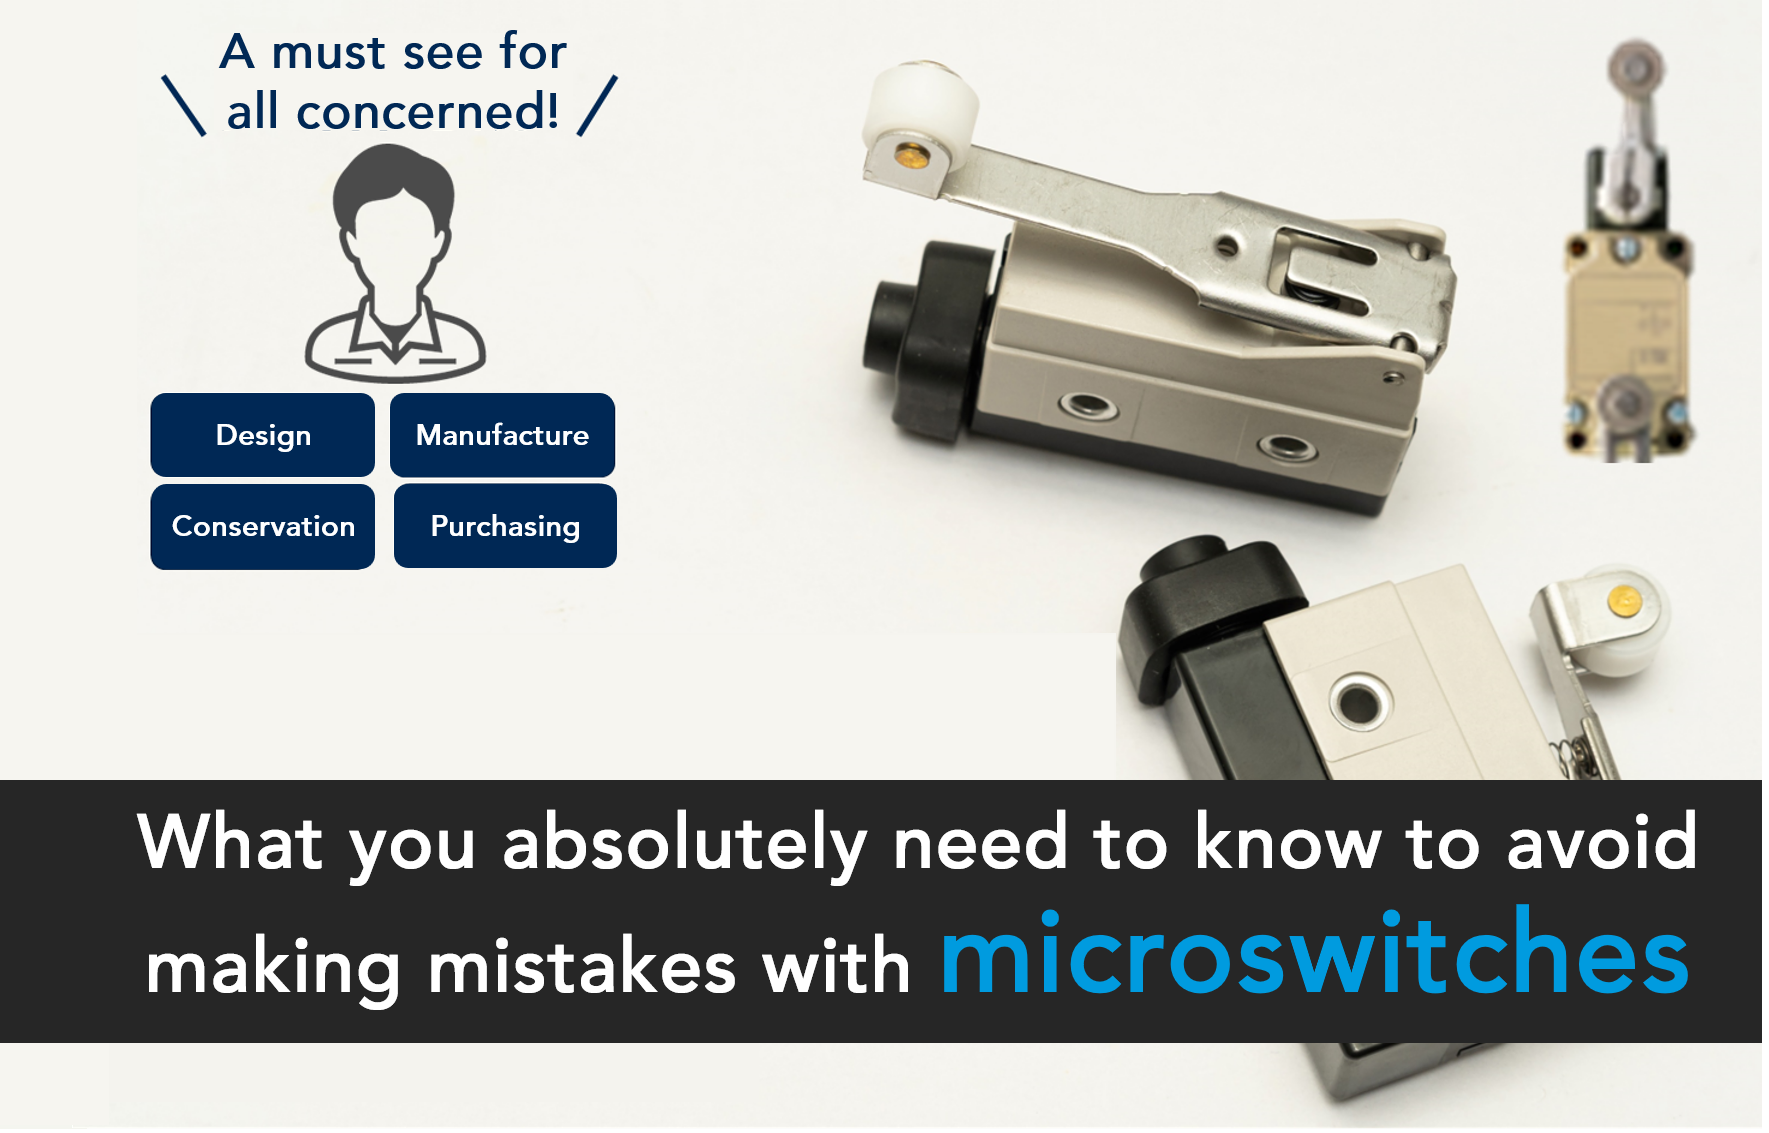 What you absolutely need to know to avoid making mistakes with microswitches